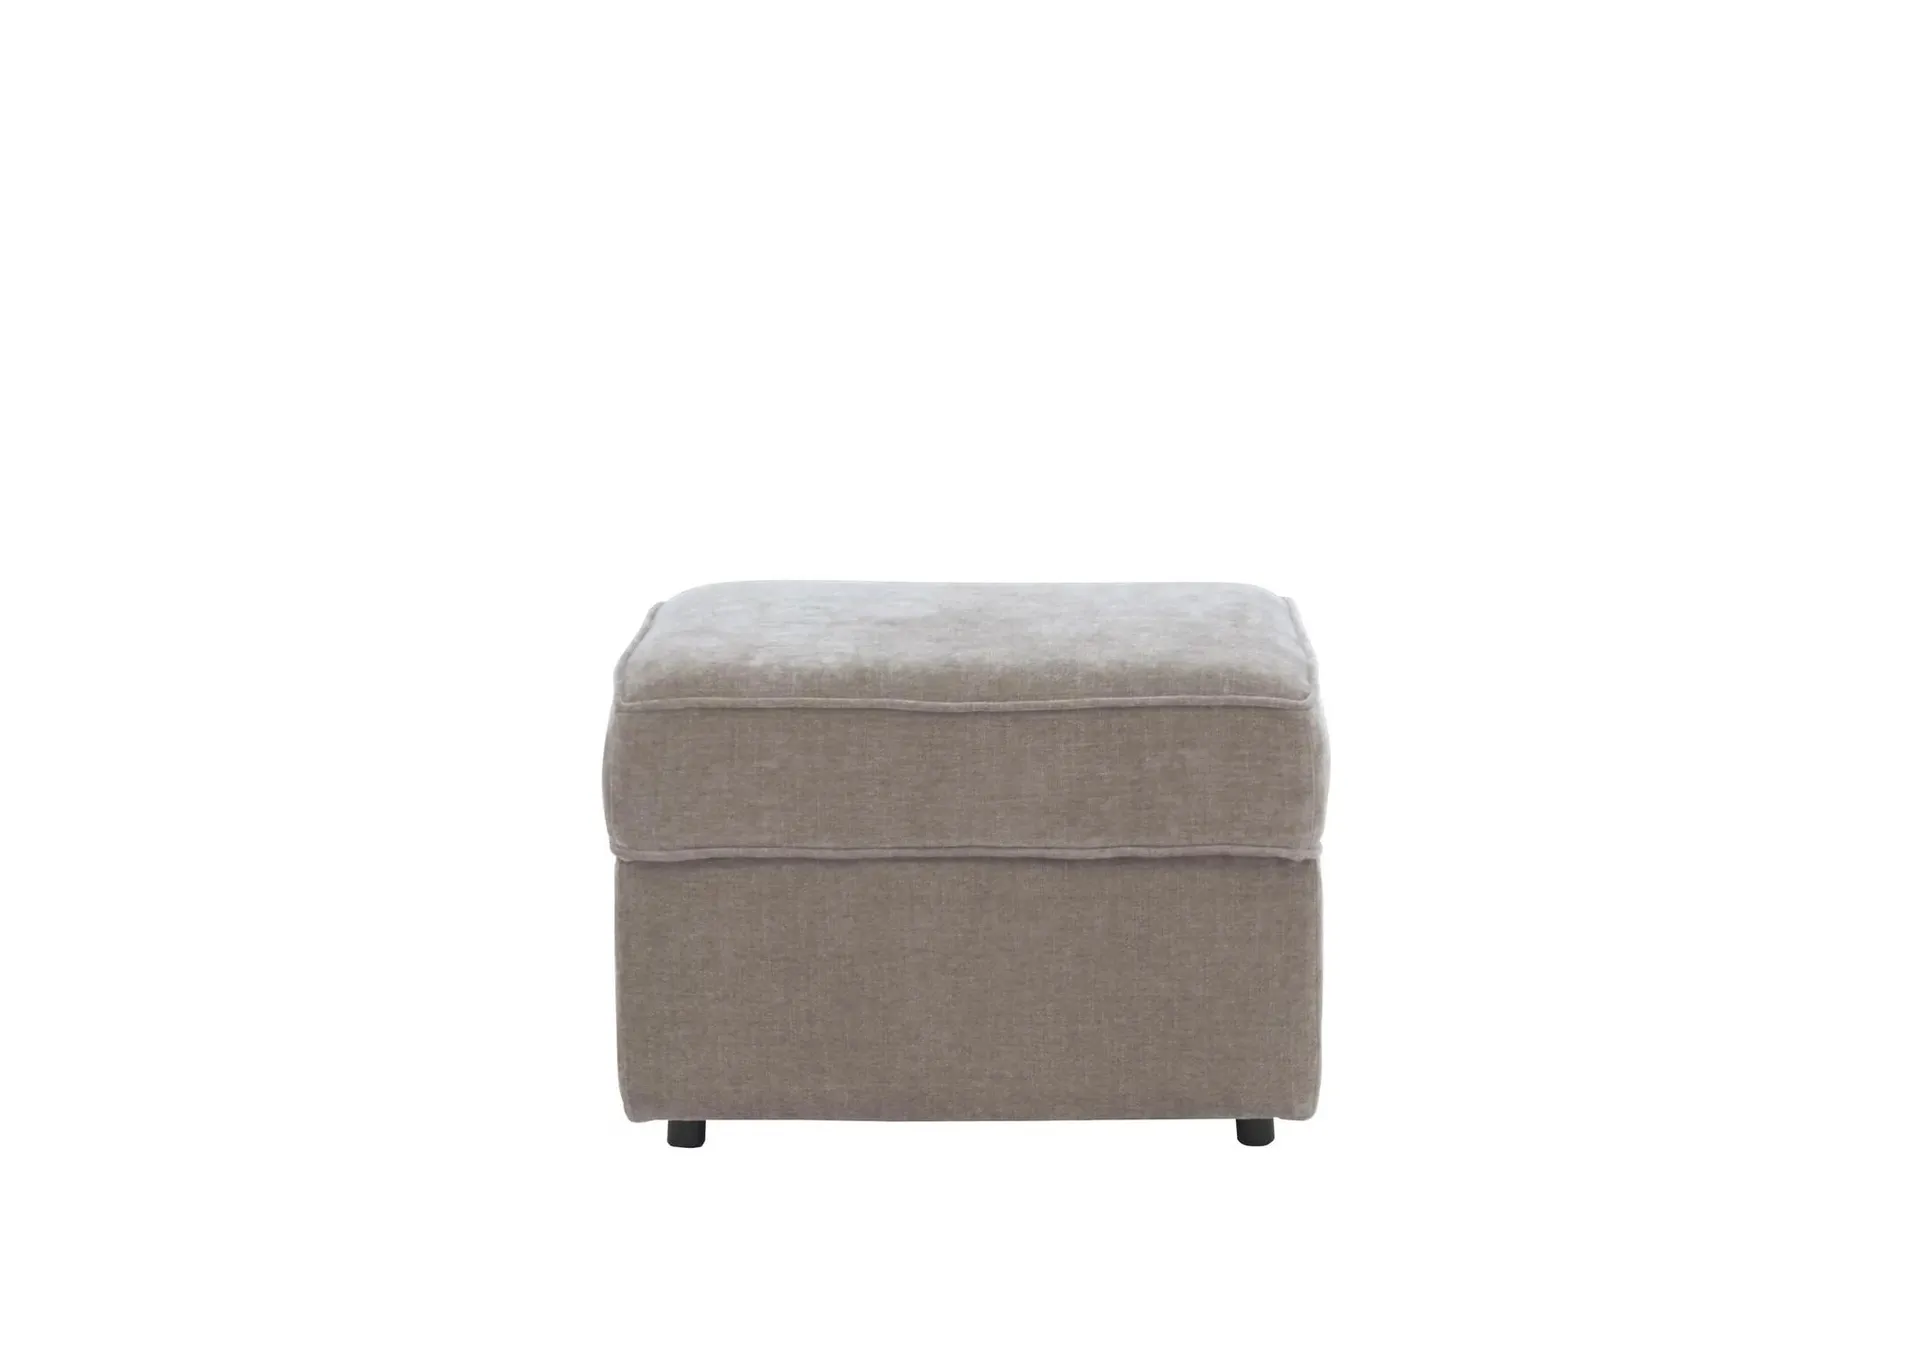 Home Fabric Storage Footstool - Limited Stock Available!